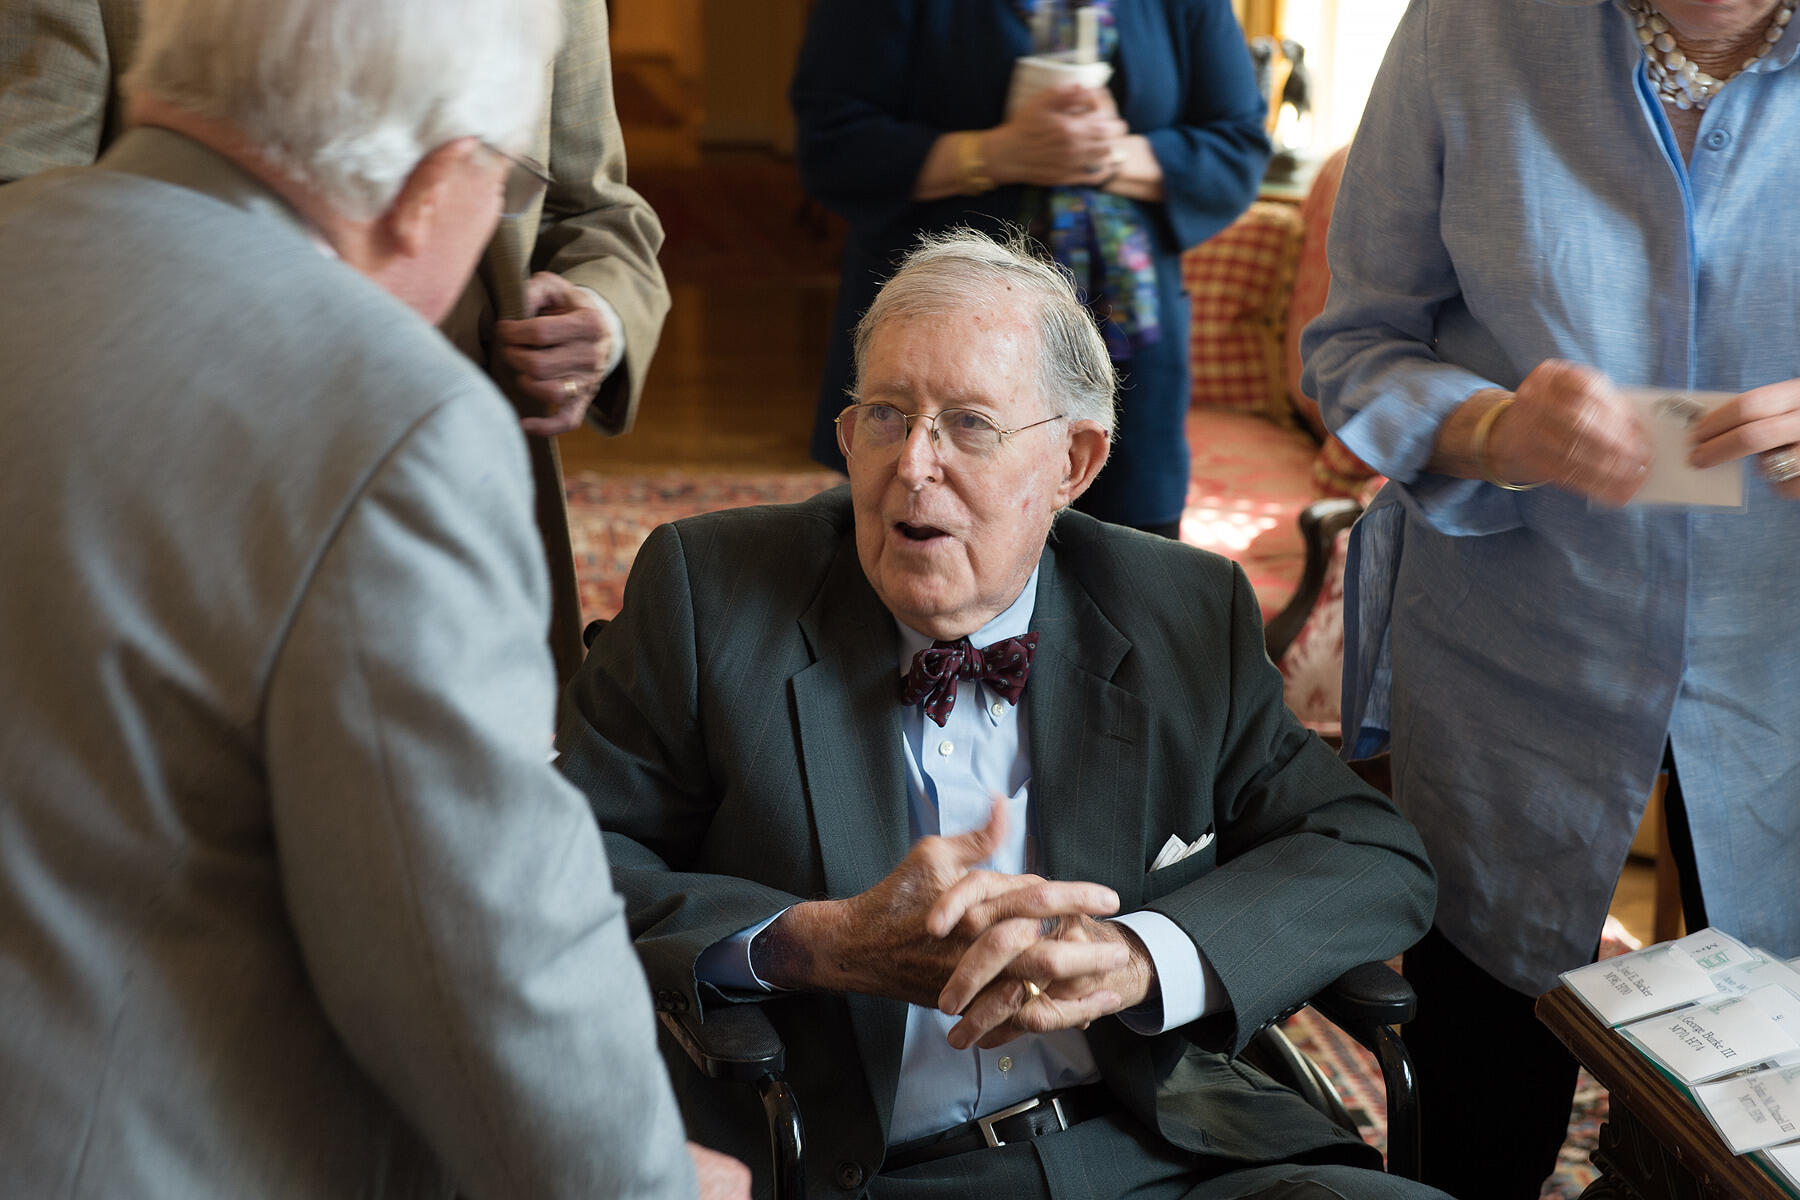 McGuire at a 2017 School of Medicine reception. Photo by Kevin Schindler.